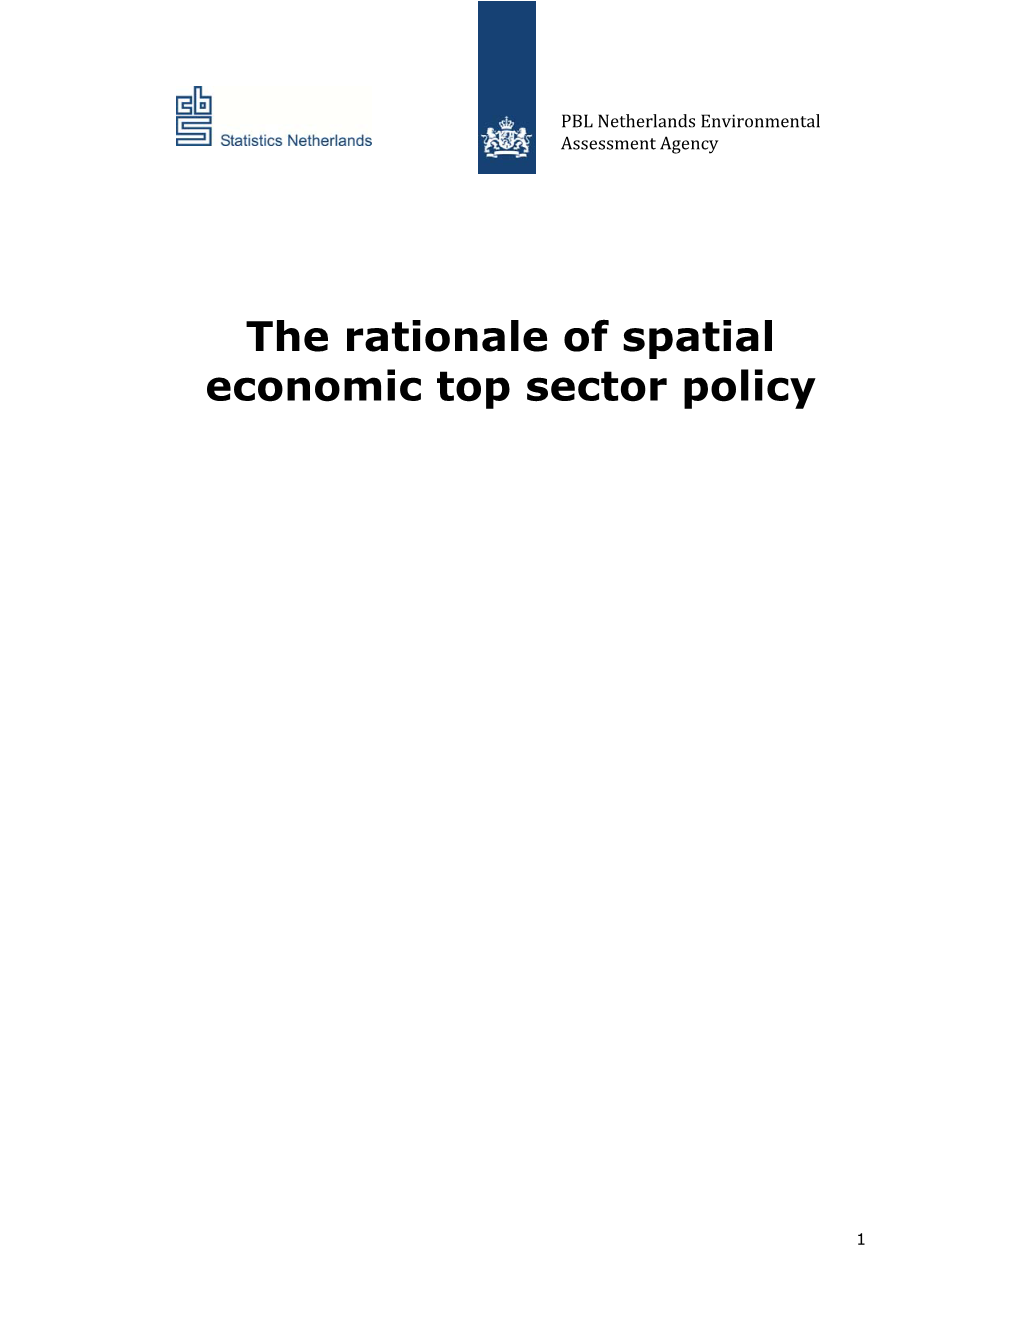 The Rationale of Spatial Economic Top Sector Policy